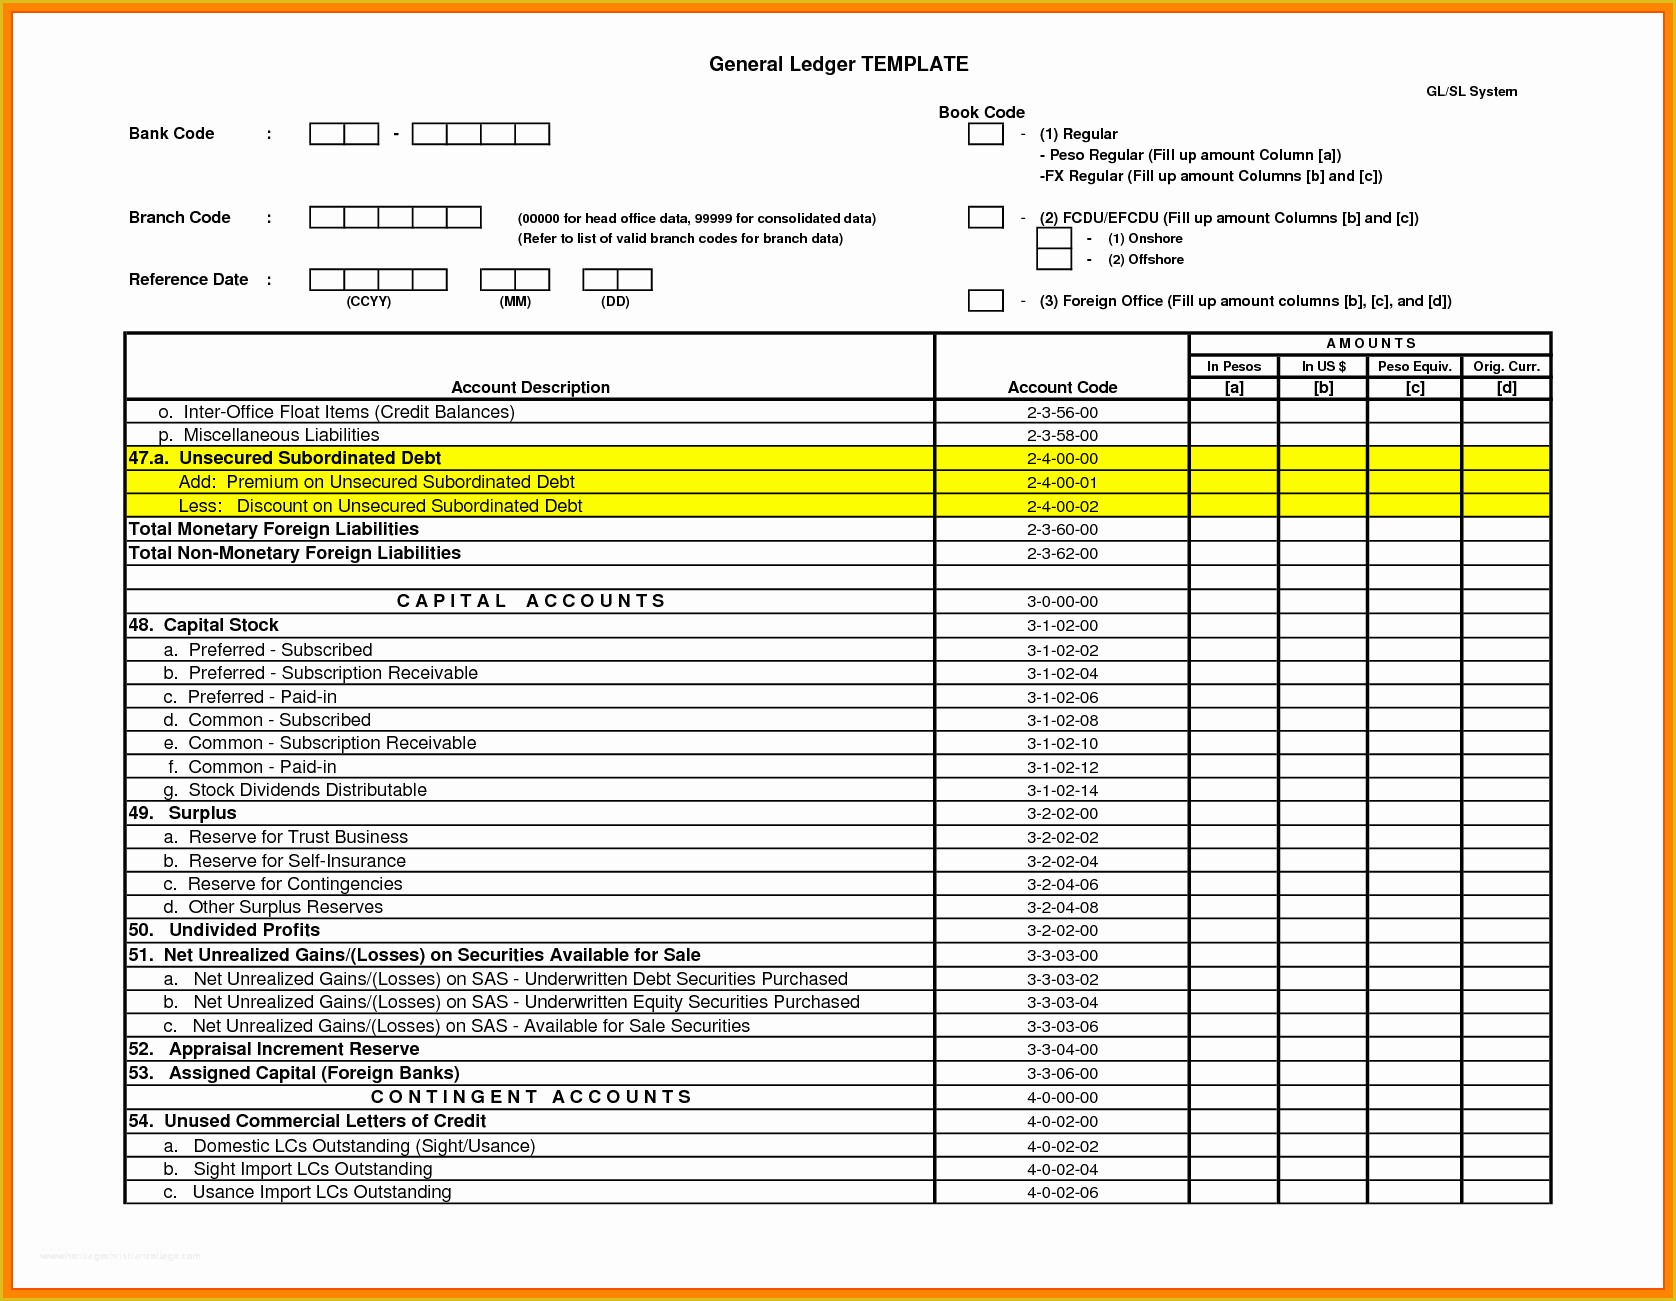 Free Small Business Ledger Template Of 11 General Ledger Template for Small Business